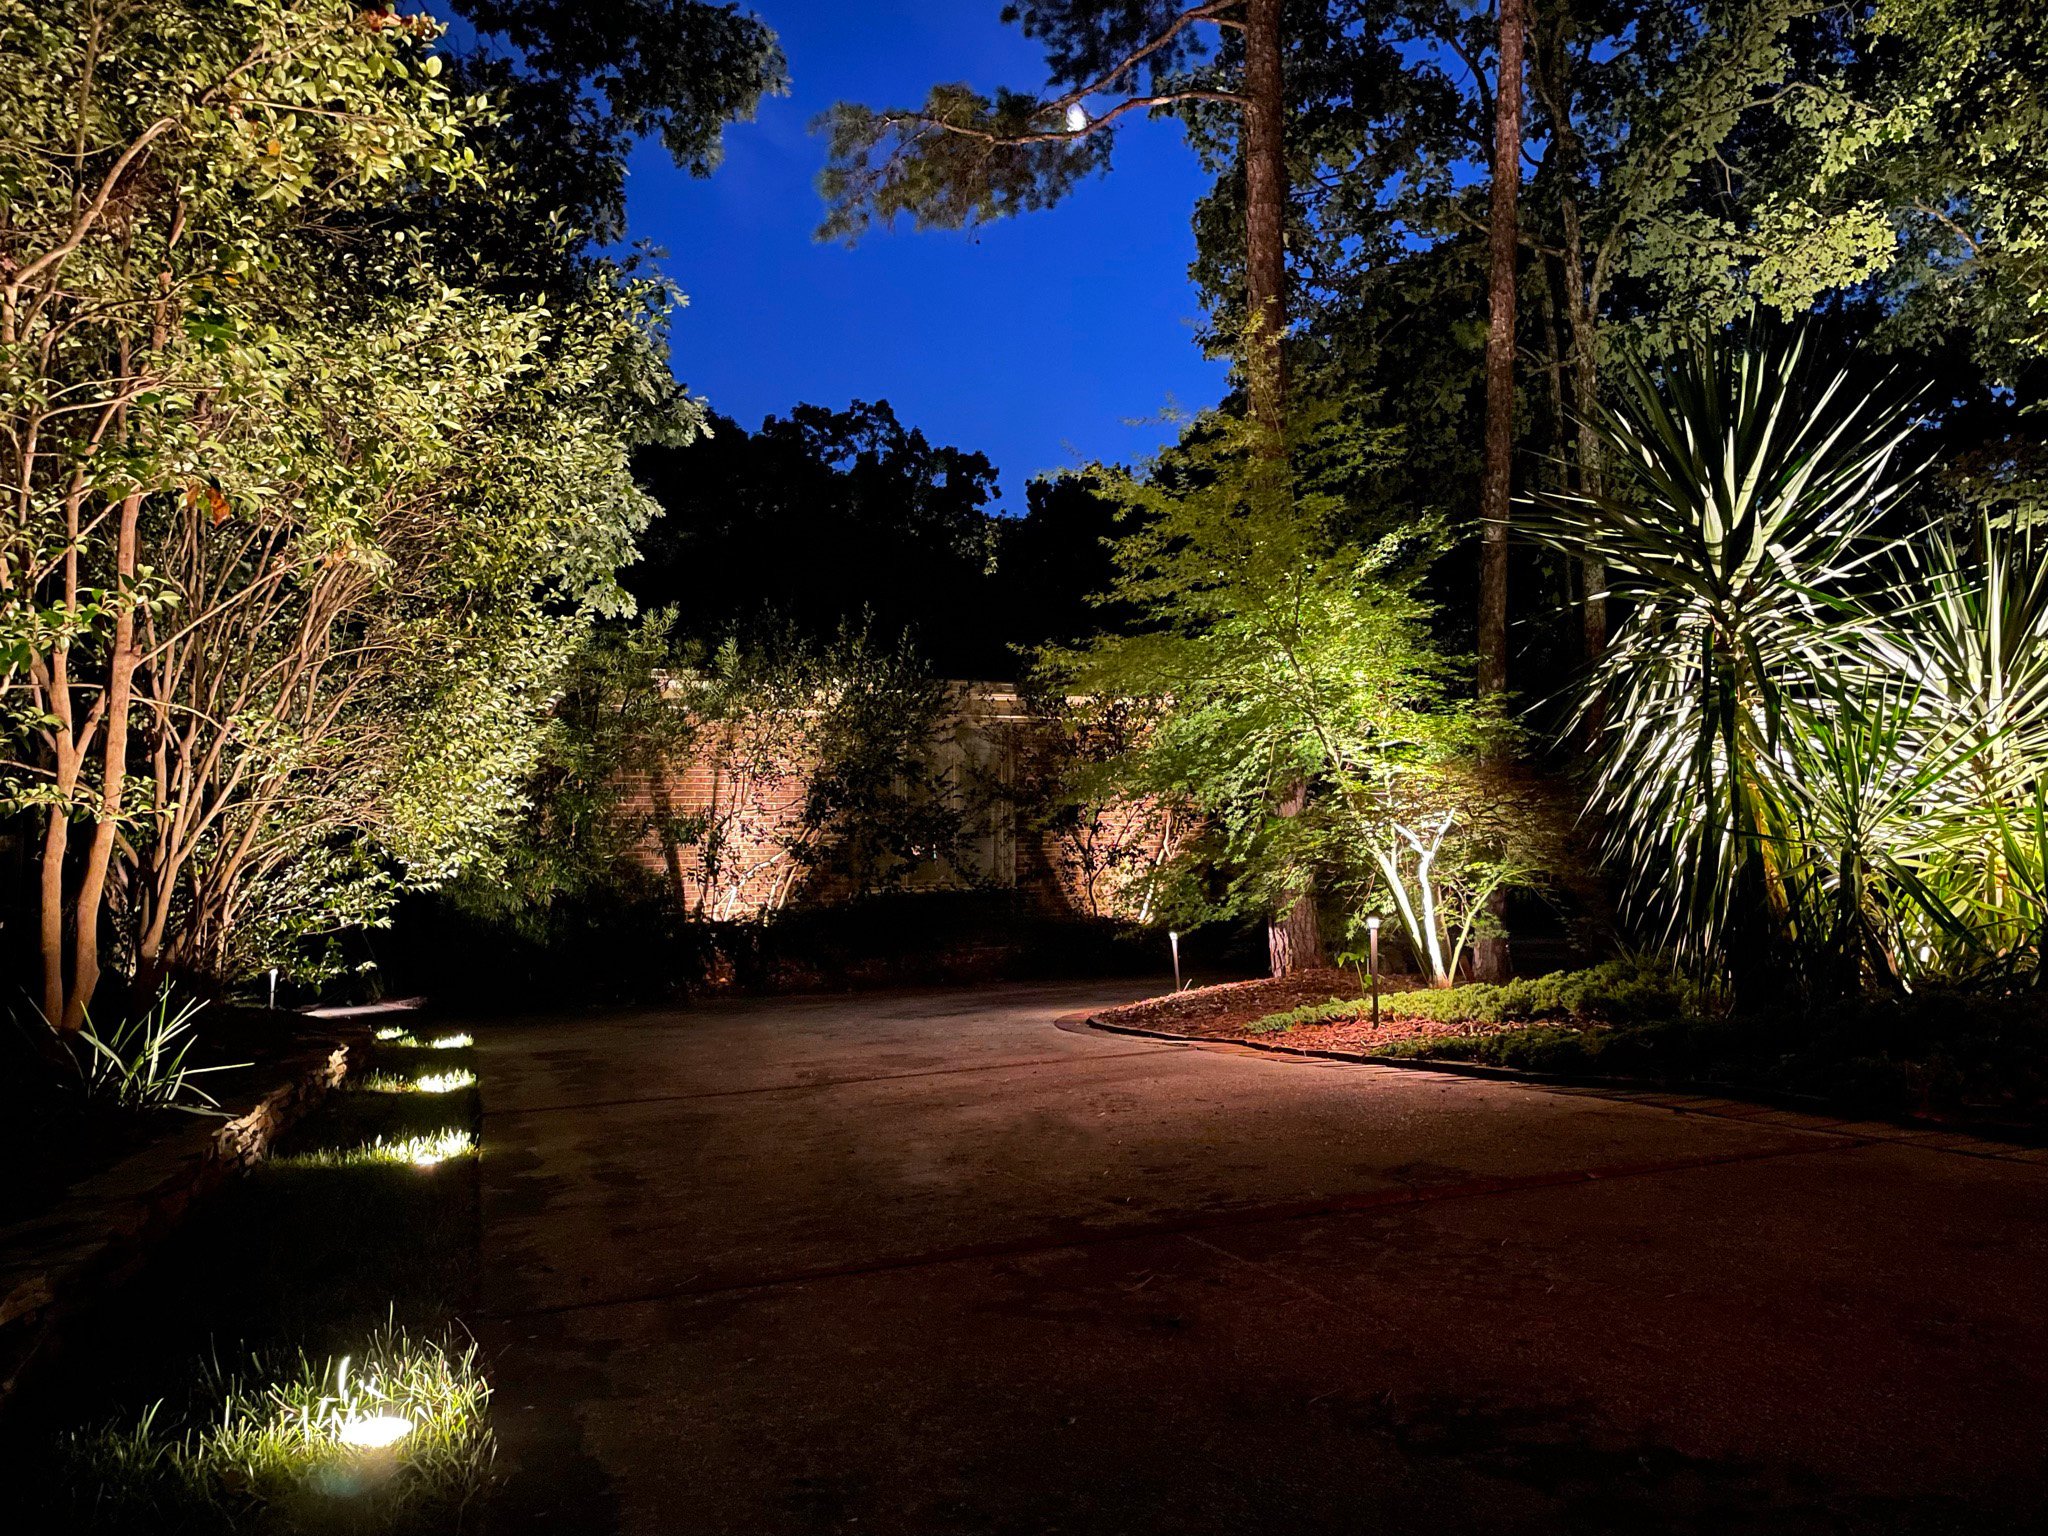  Front driveway of a red brick home is lit with a variety of landscape lights including path lights and accent lights on trees and larger plants. 